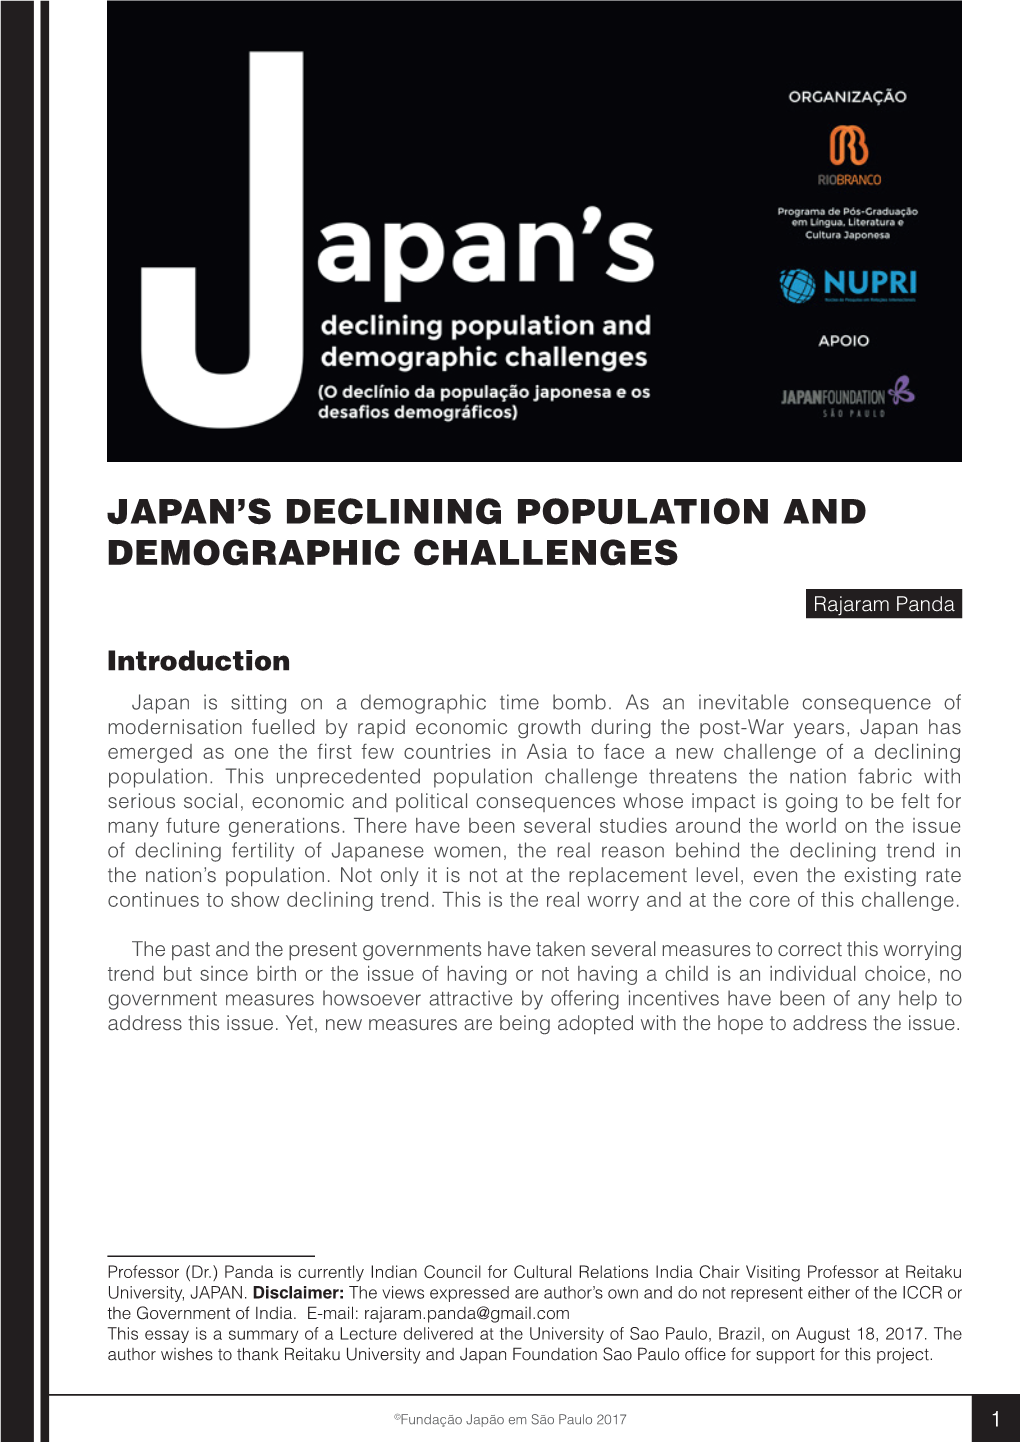 Japan's Declining Population and Demographic Challenges